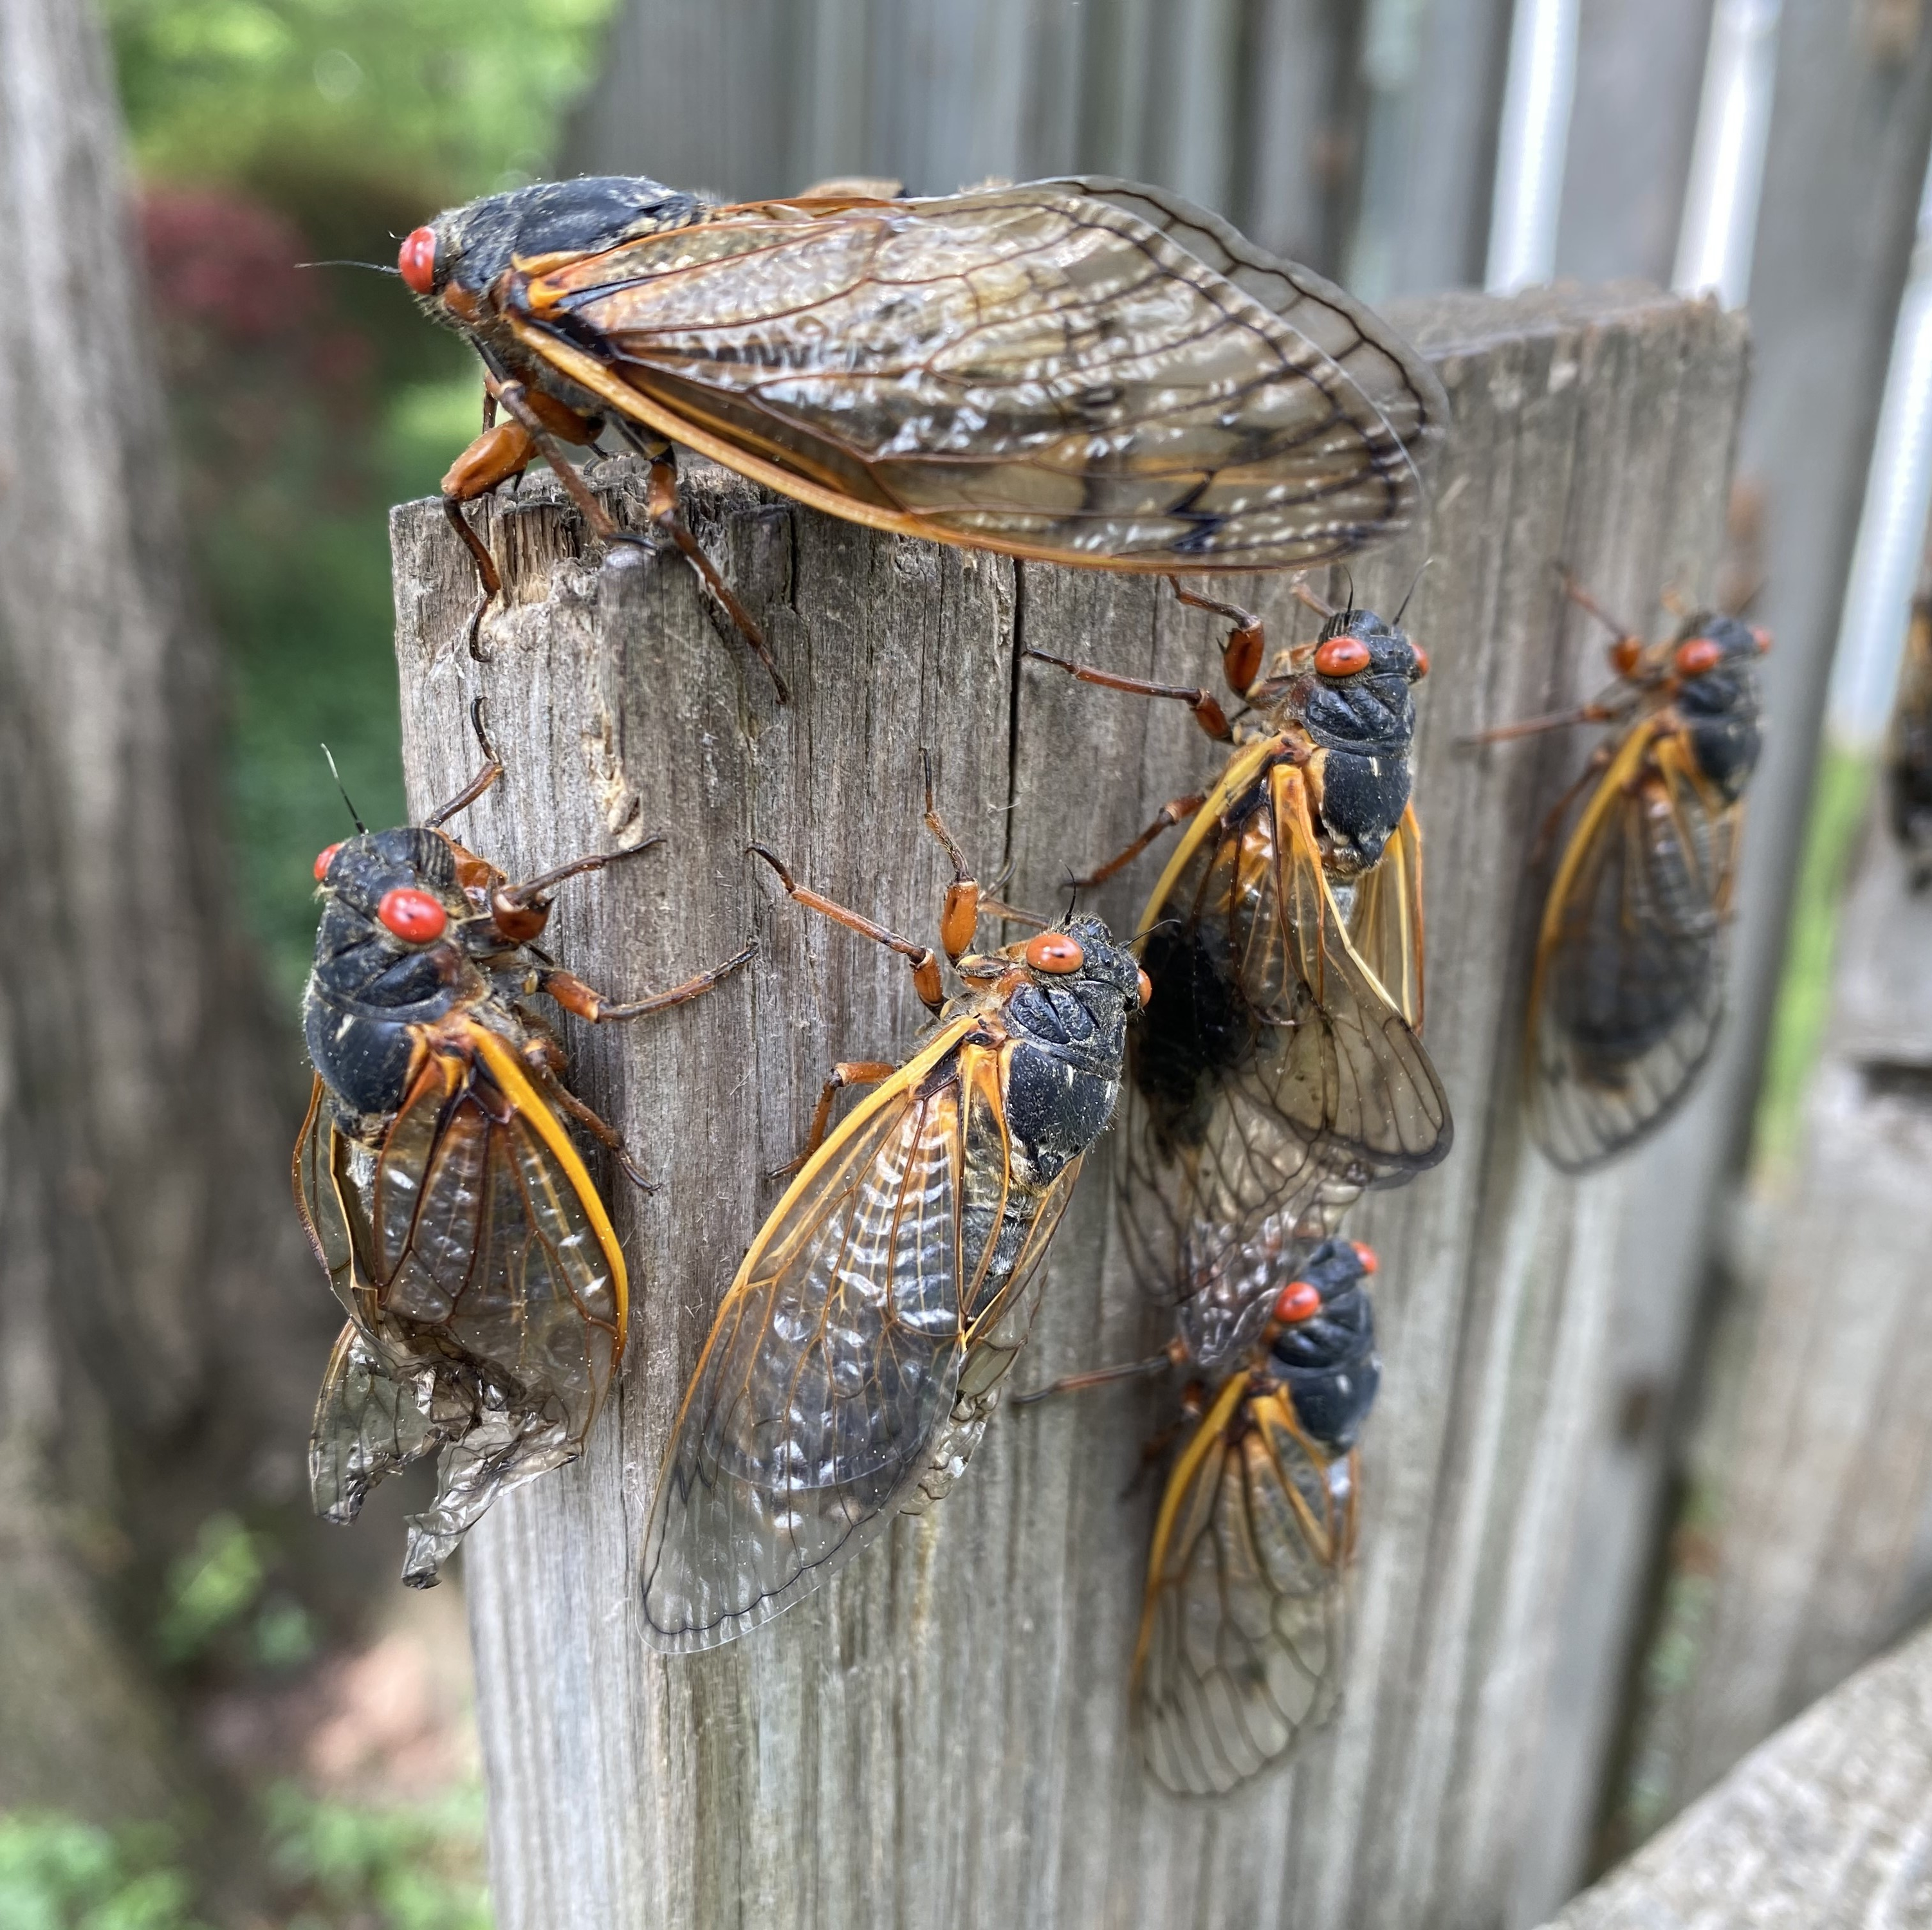 Coming cicada-geddon may not be so scary for adventurous foodies